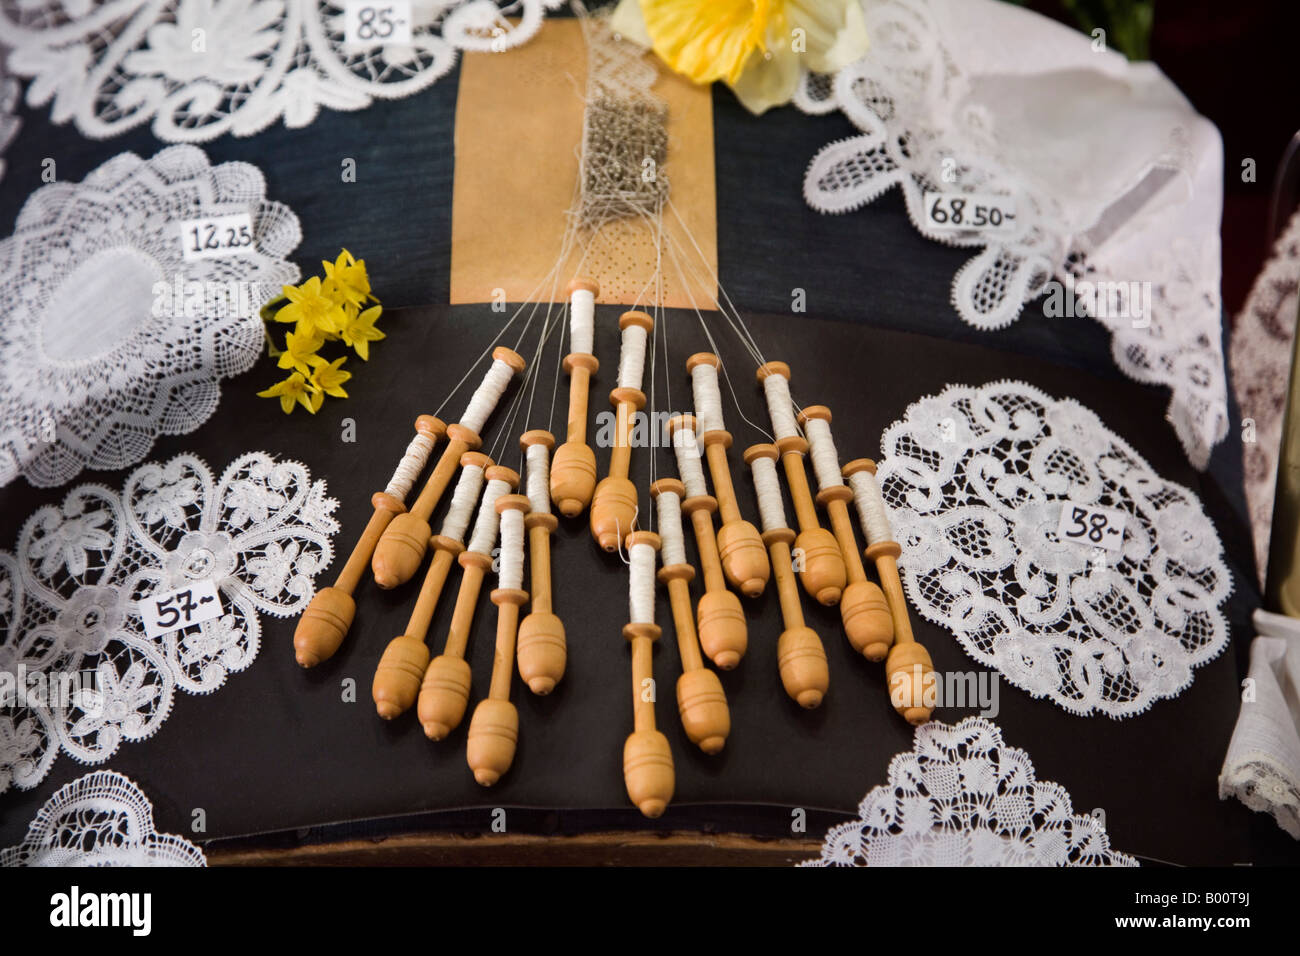 Display of lace and lacemaking in shop window in Brussels, Belgium Stock Photo